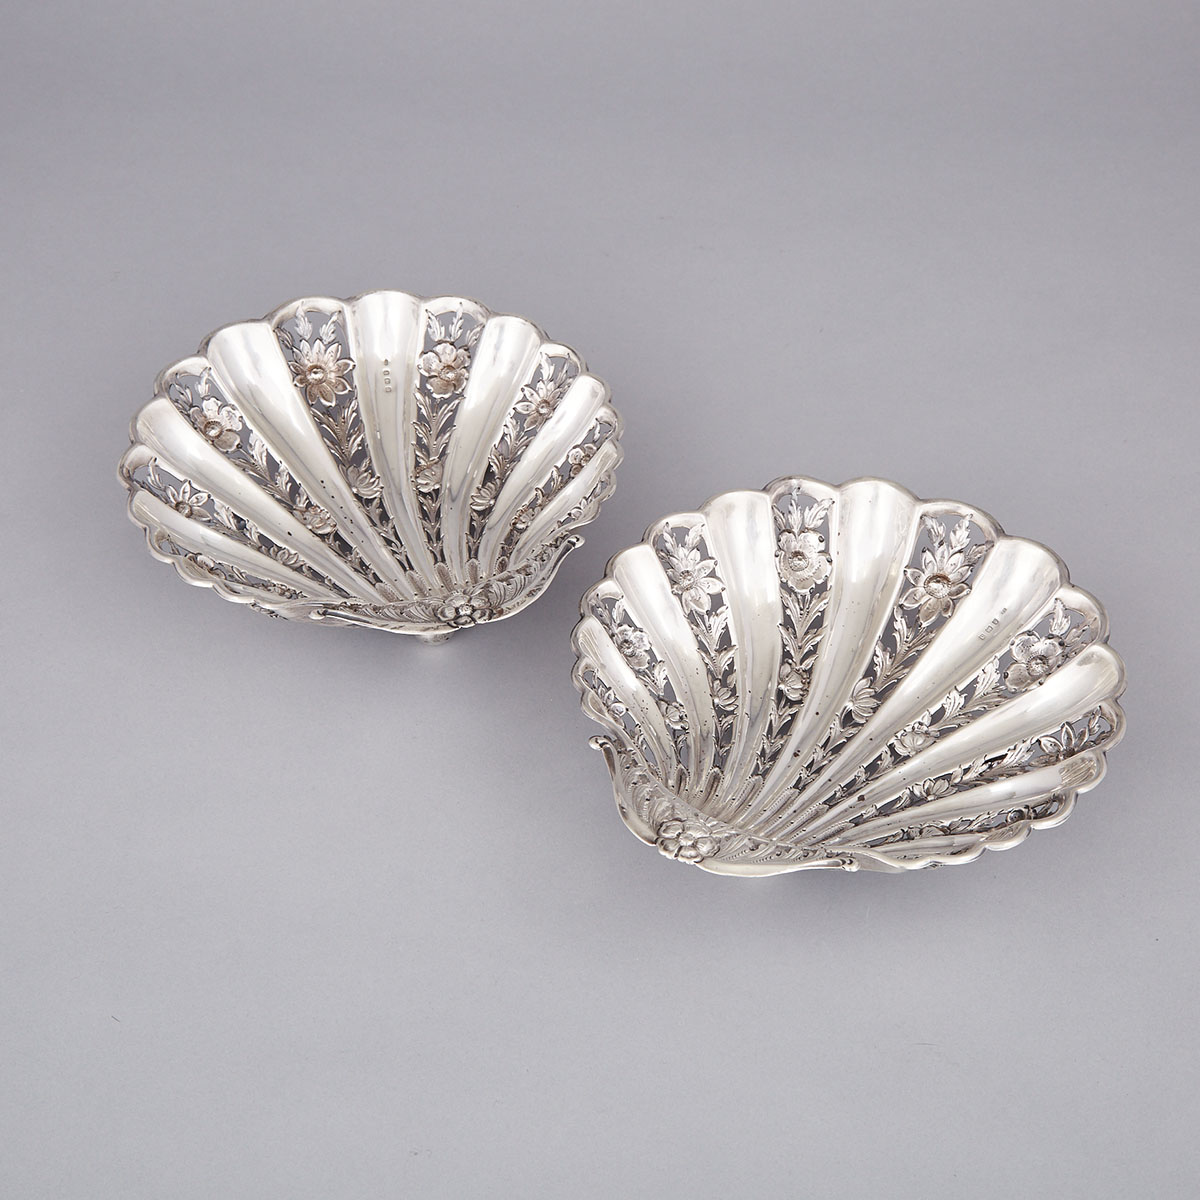 Pair of English Silver Pierced Shell Shaped Sweetmeat Dishes, George Randle, Birmingham, 1912